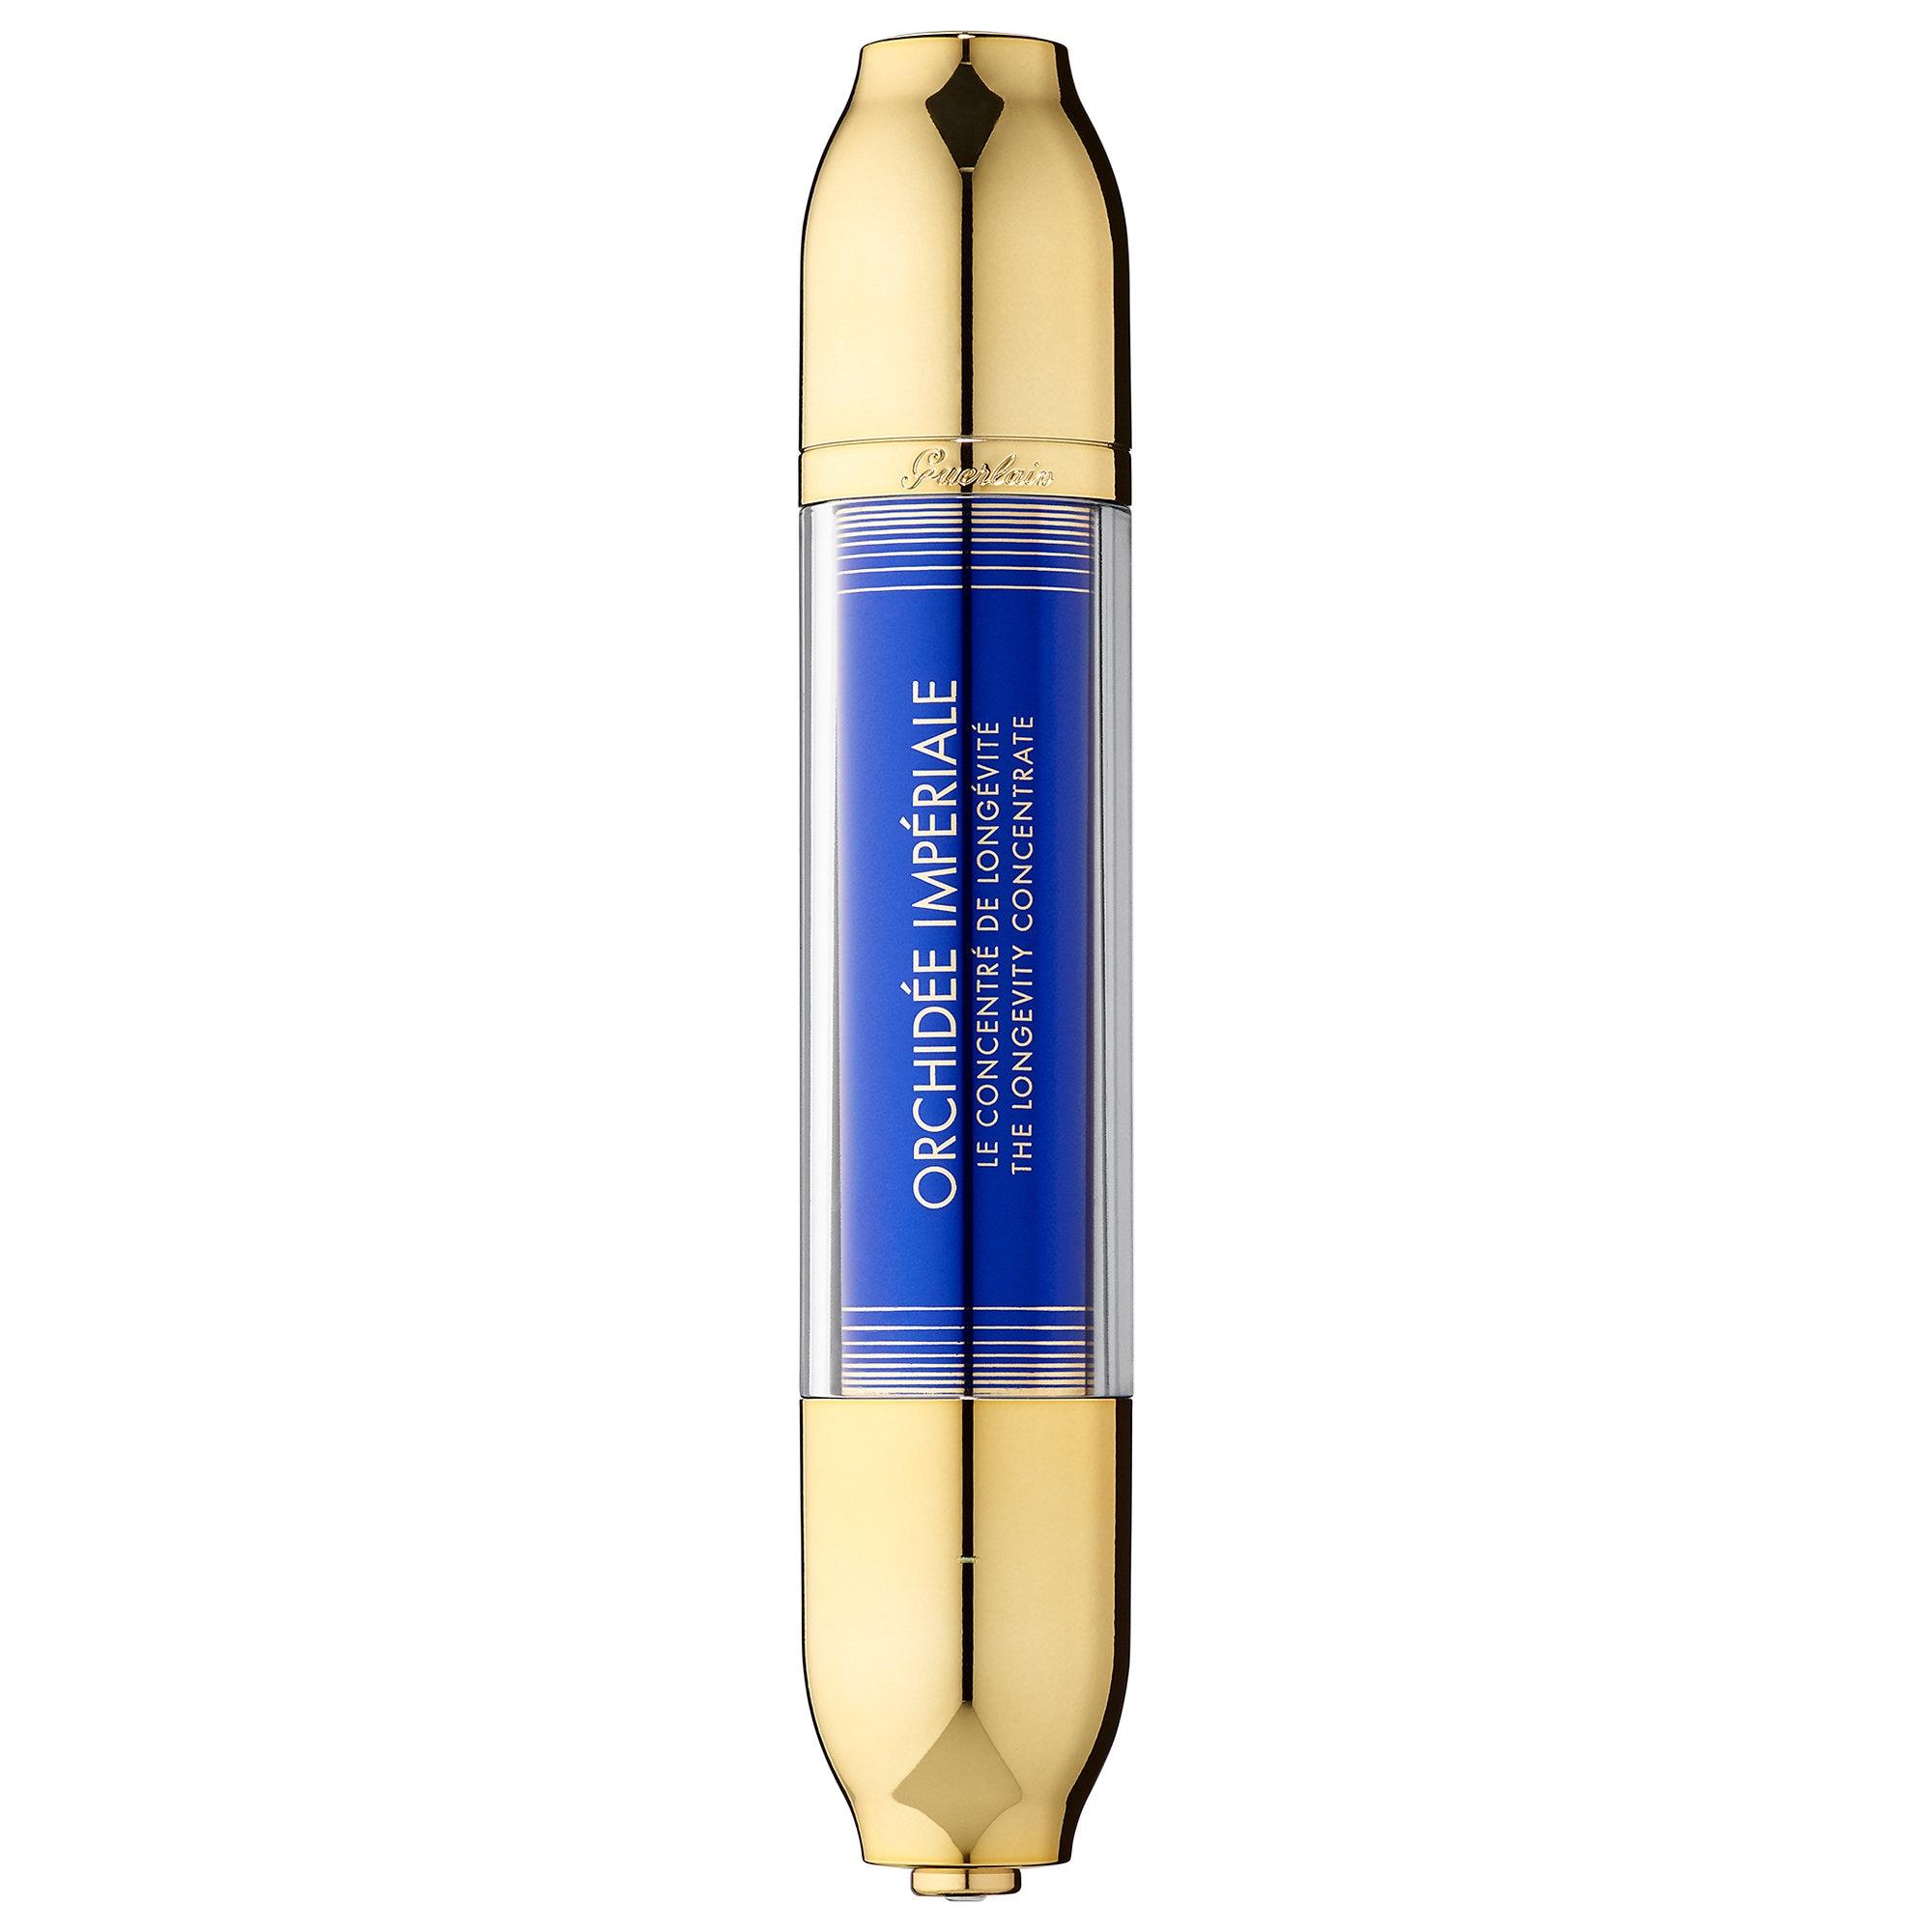 Orchidee Imperiale Longevity Concentrate